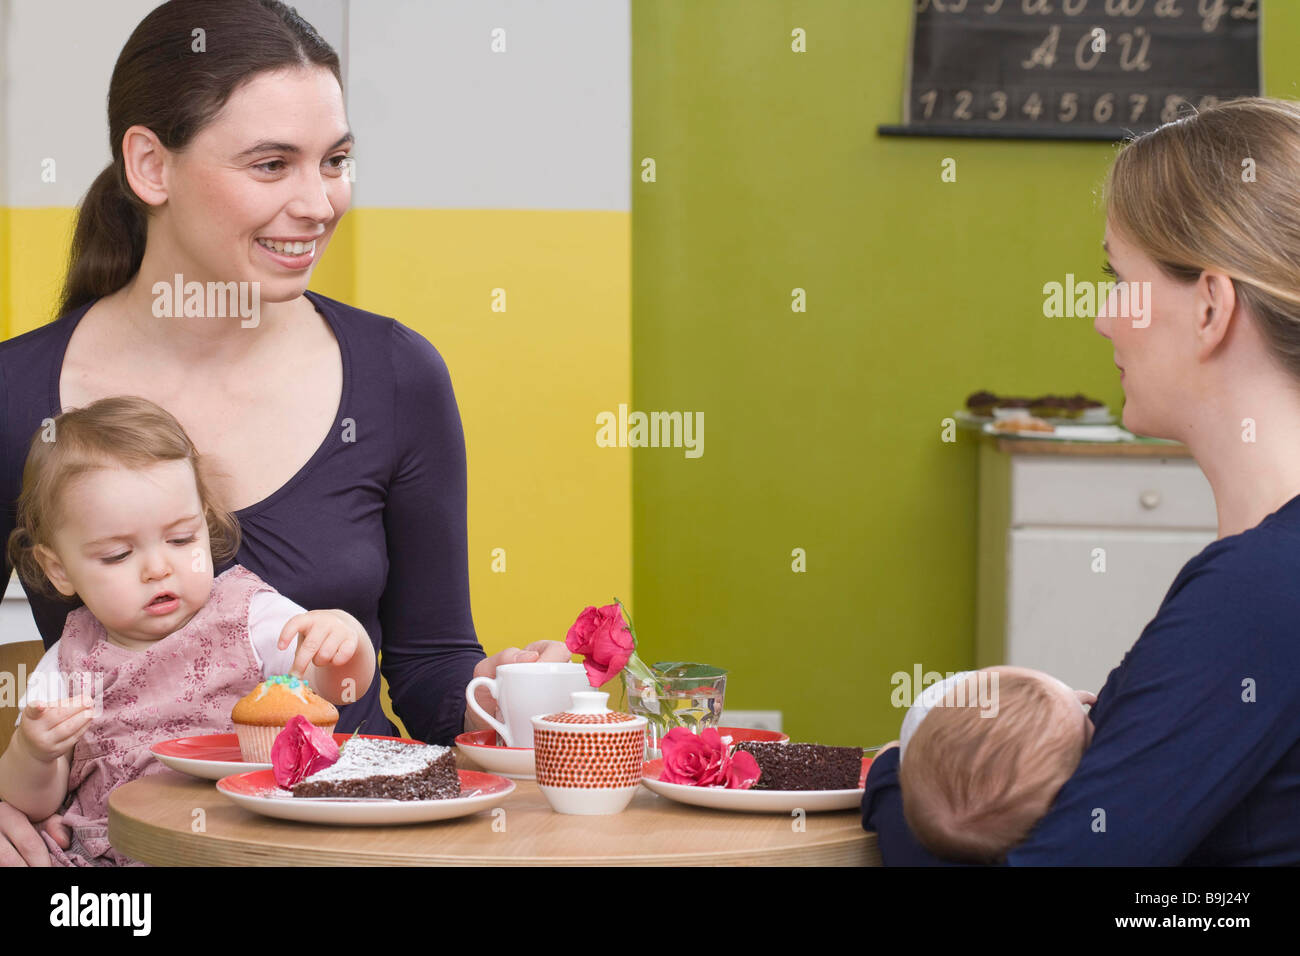 Two young mothers with their babies Stock Photo